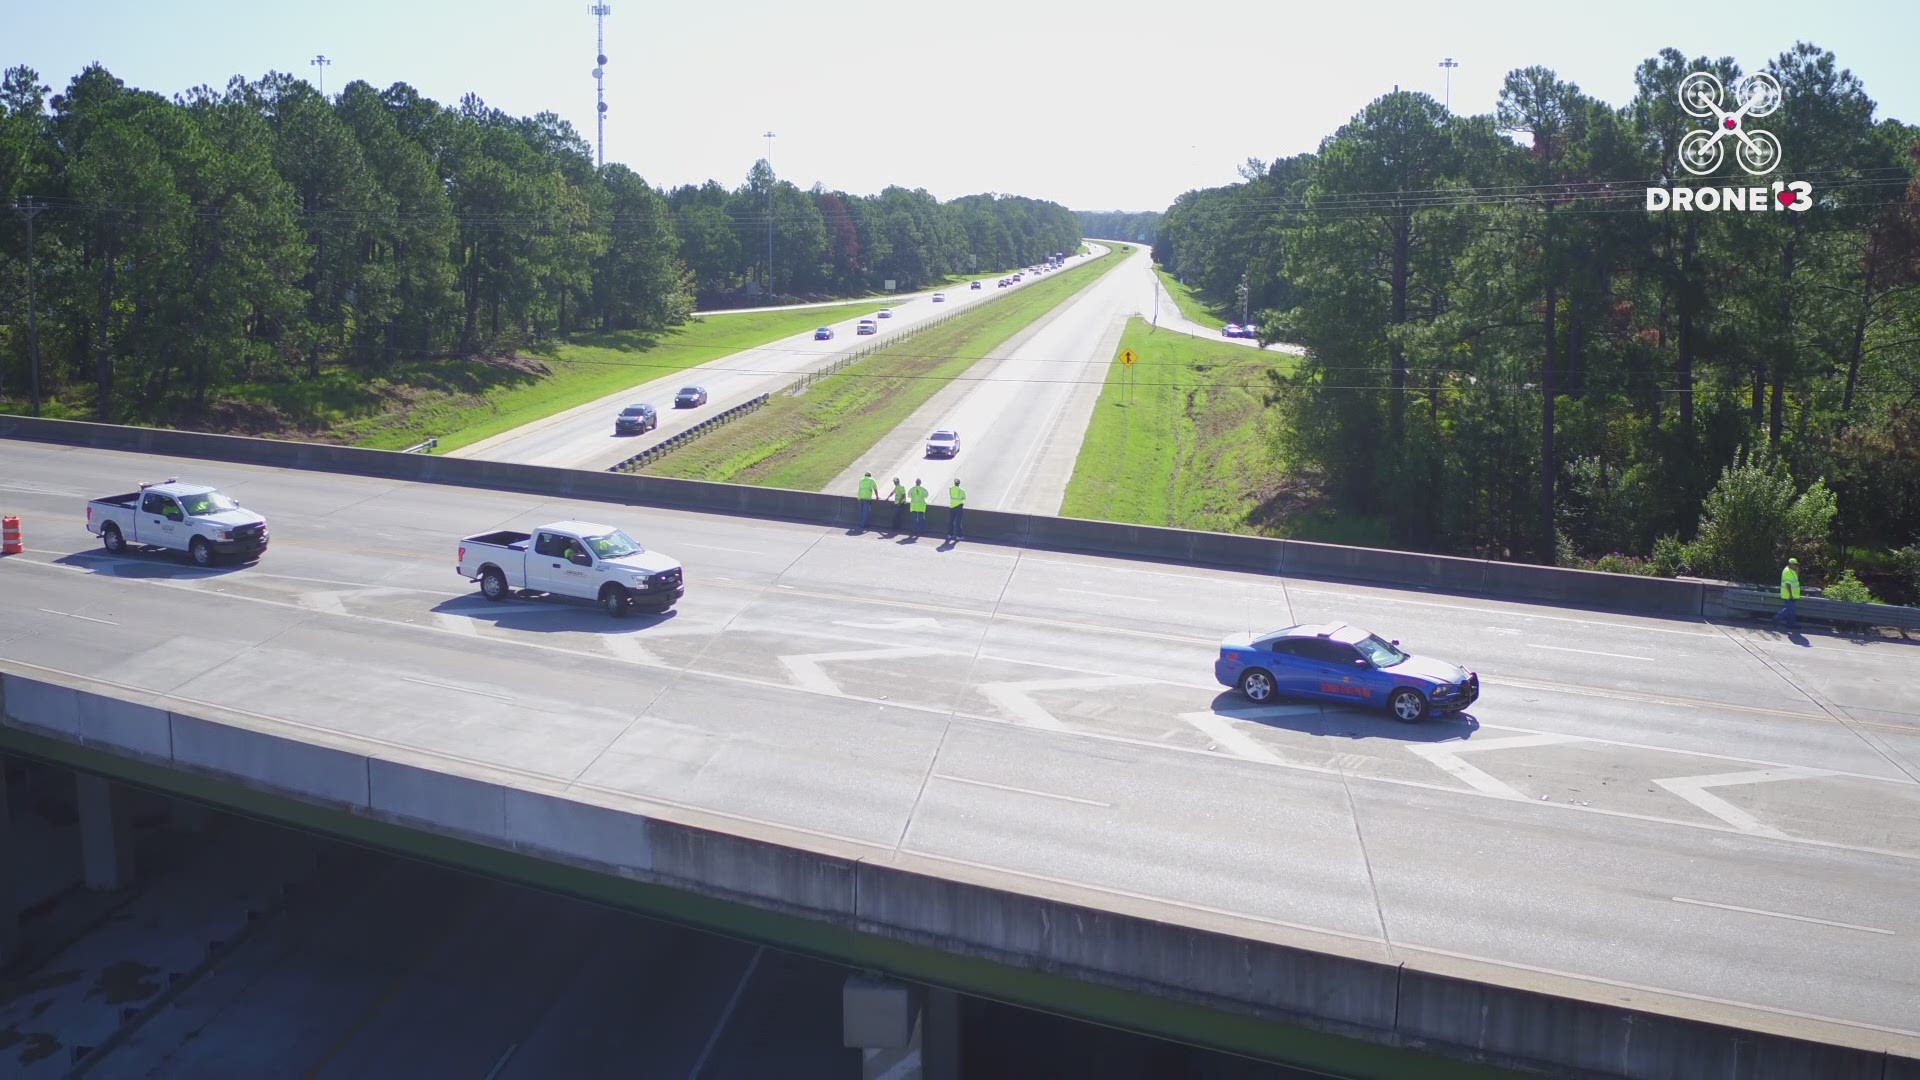 To speed up the process for those evacuating areas targeted by Hurricane Dorian, GDOT began contraflow, which essentially reverses lanes of the interstate from Savannah to Dublin.